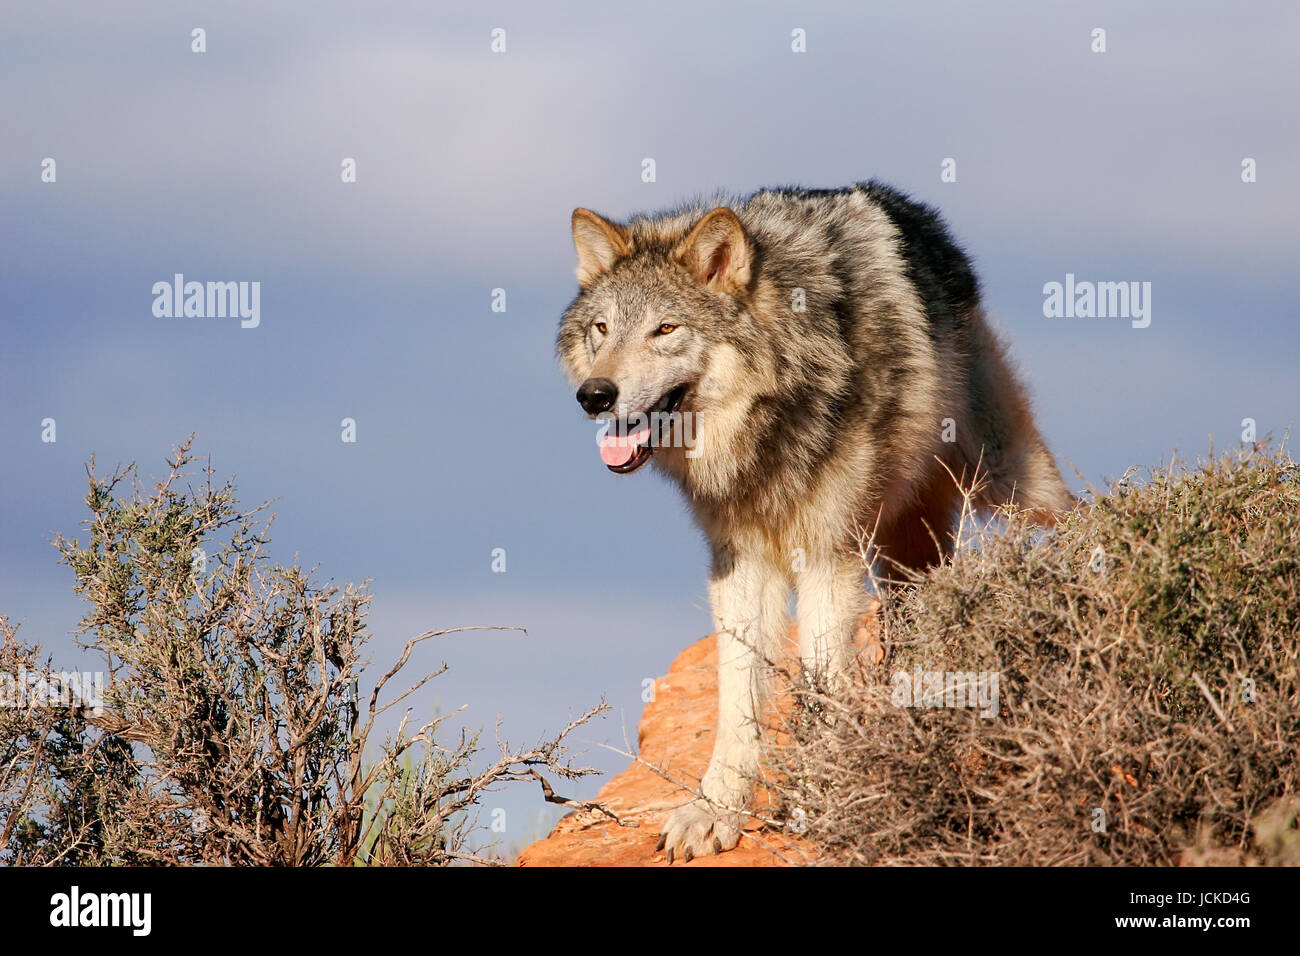 Gray wolf (Canis lupus) in a desert with red rock formations Stock Photo